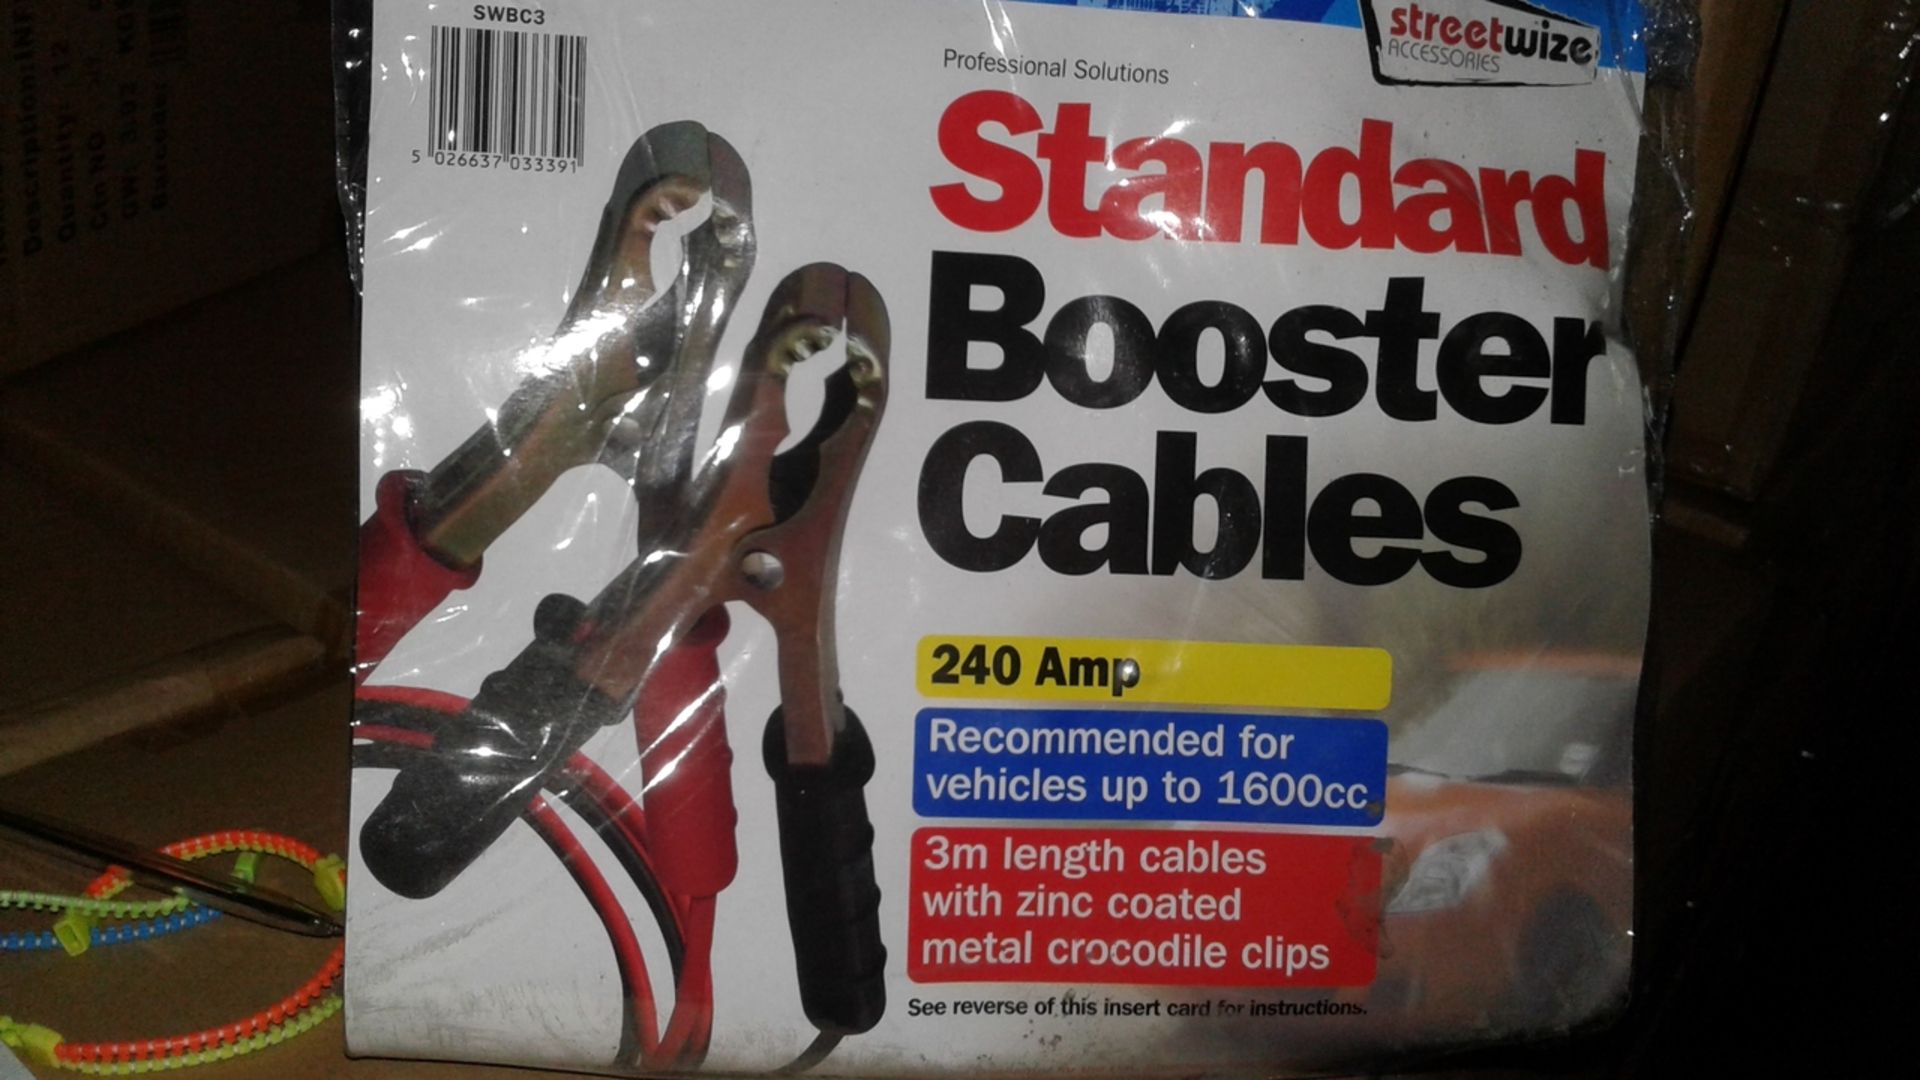 10 pcs x 240 Amp booster cables - brand new